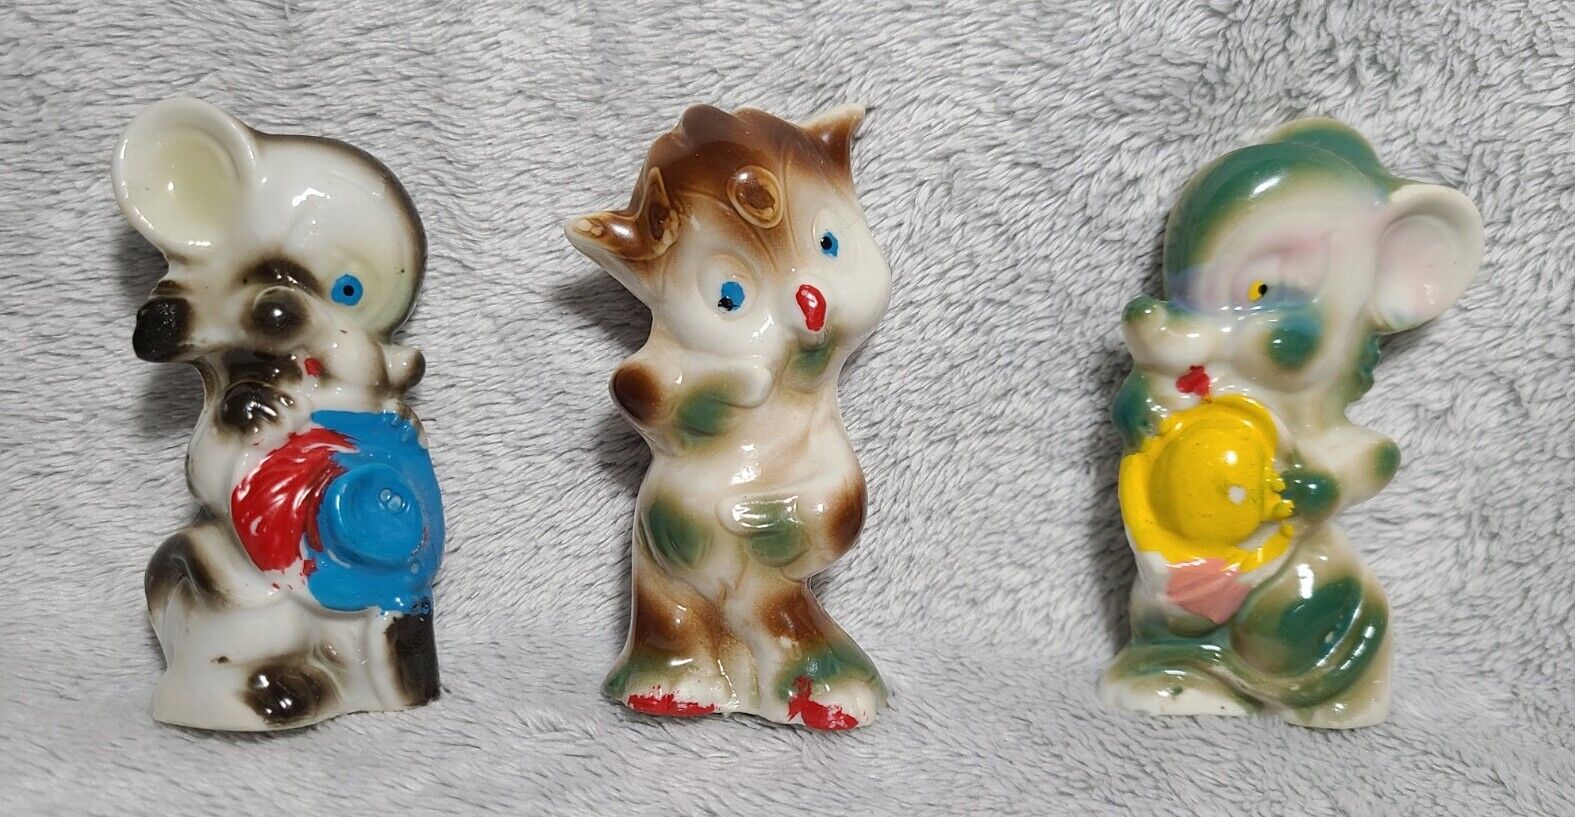 Vintage 1930s-1950s Cowboy Mouse, Cat, and Elephant Figurines - Made in Japan